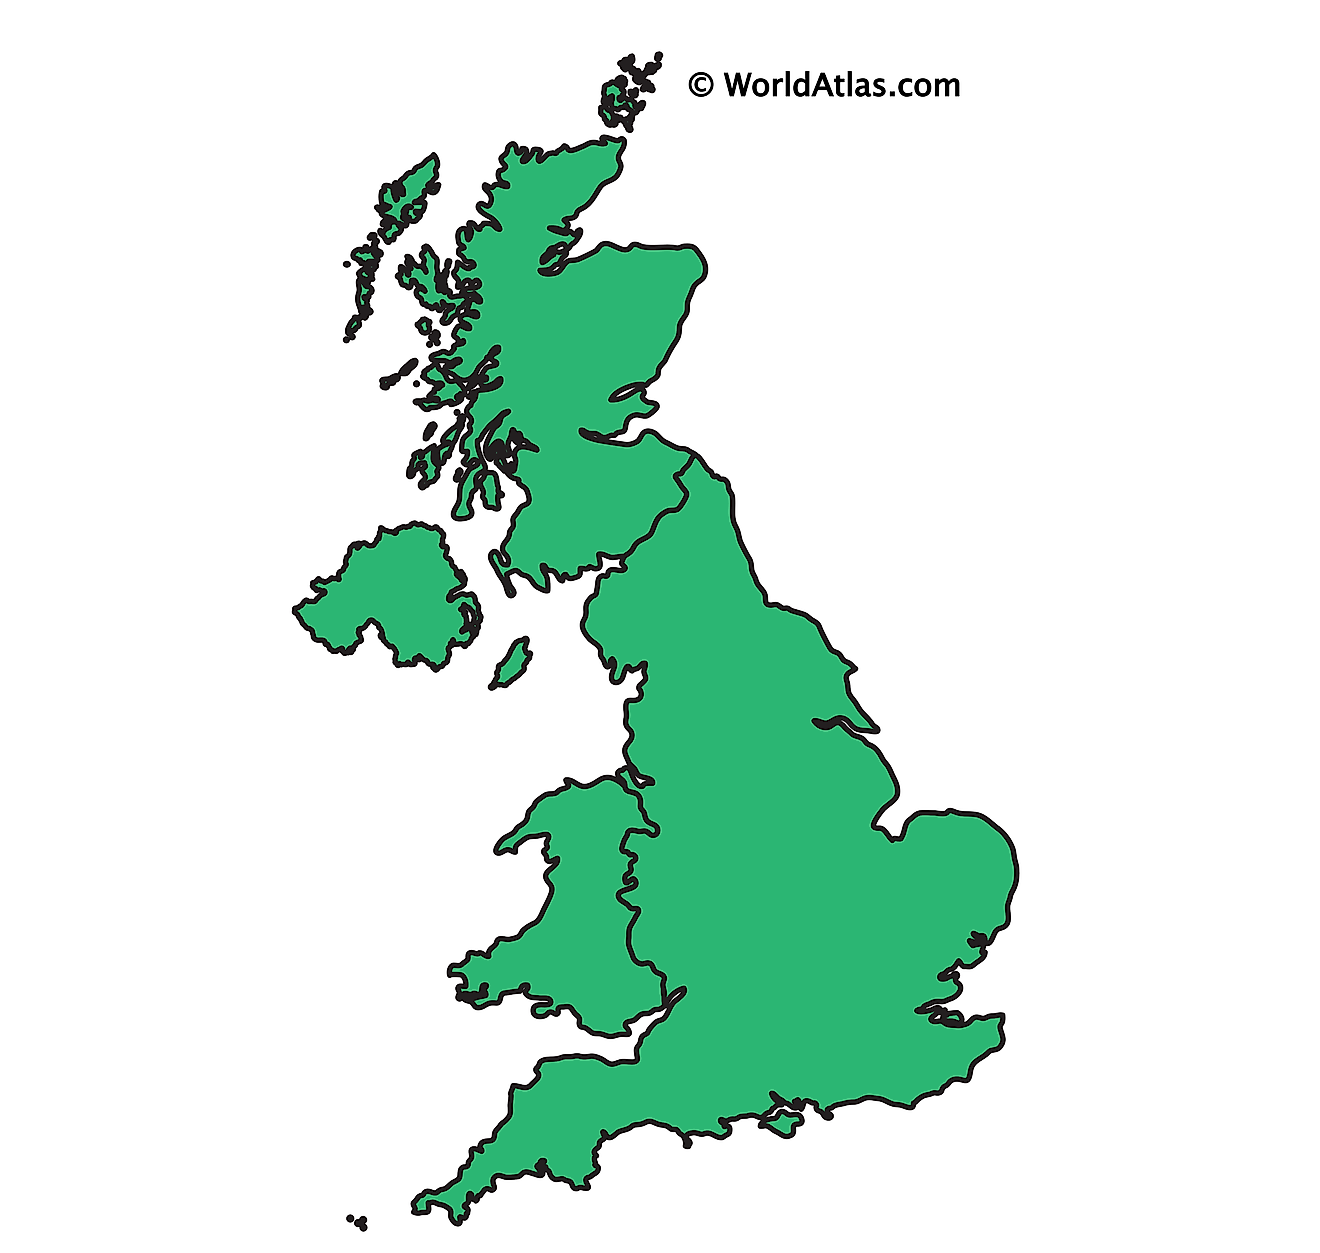 Outline Map of The United Kingdom